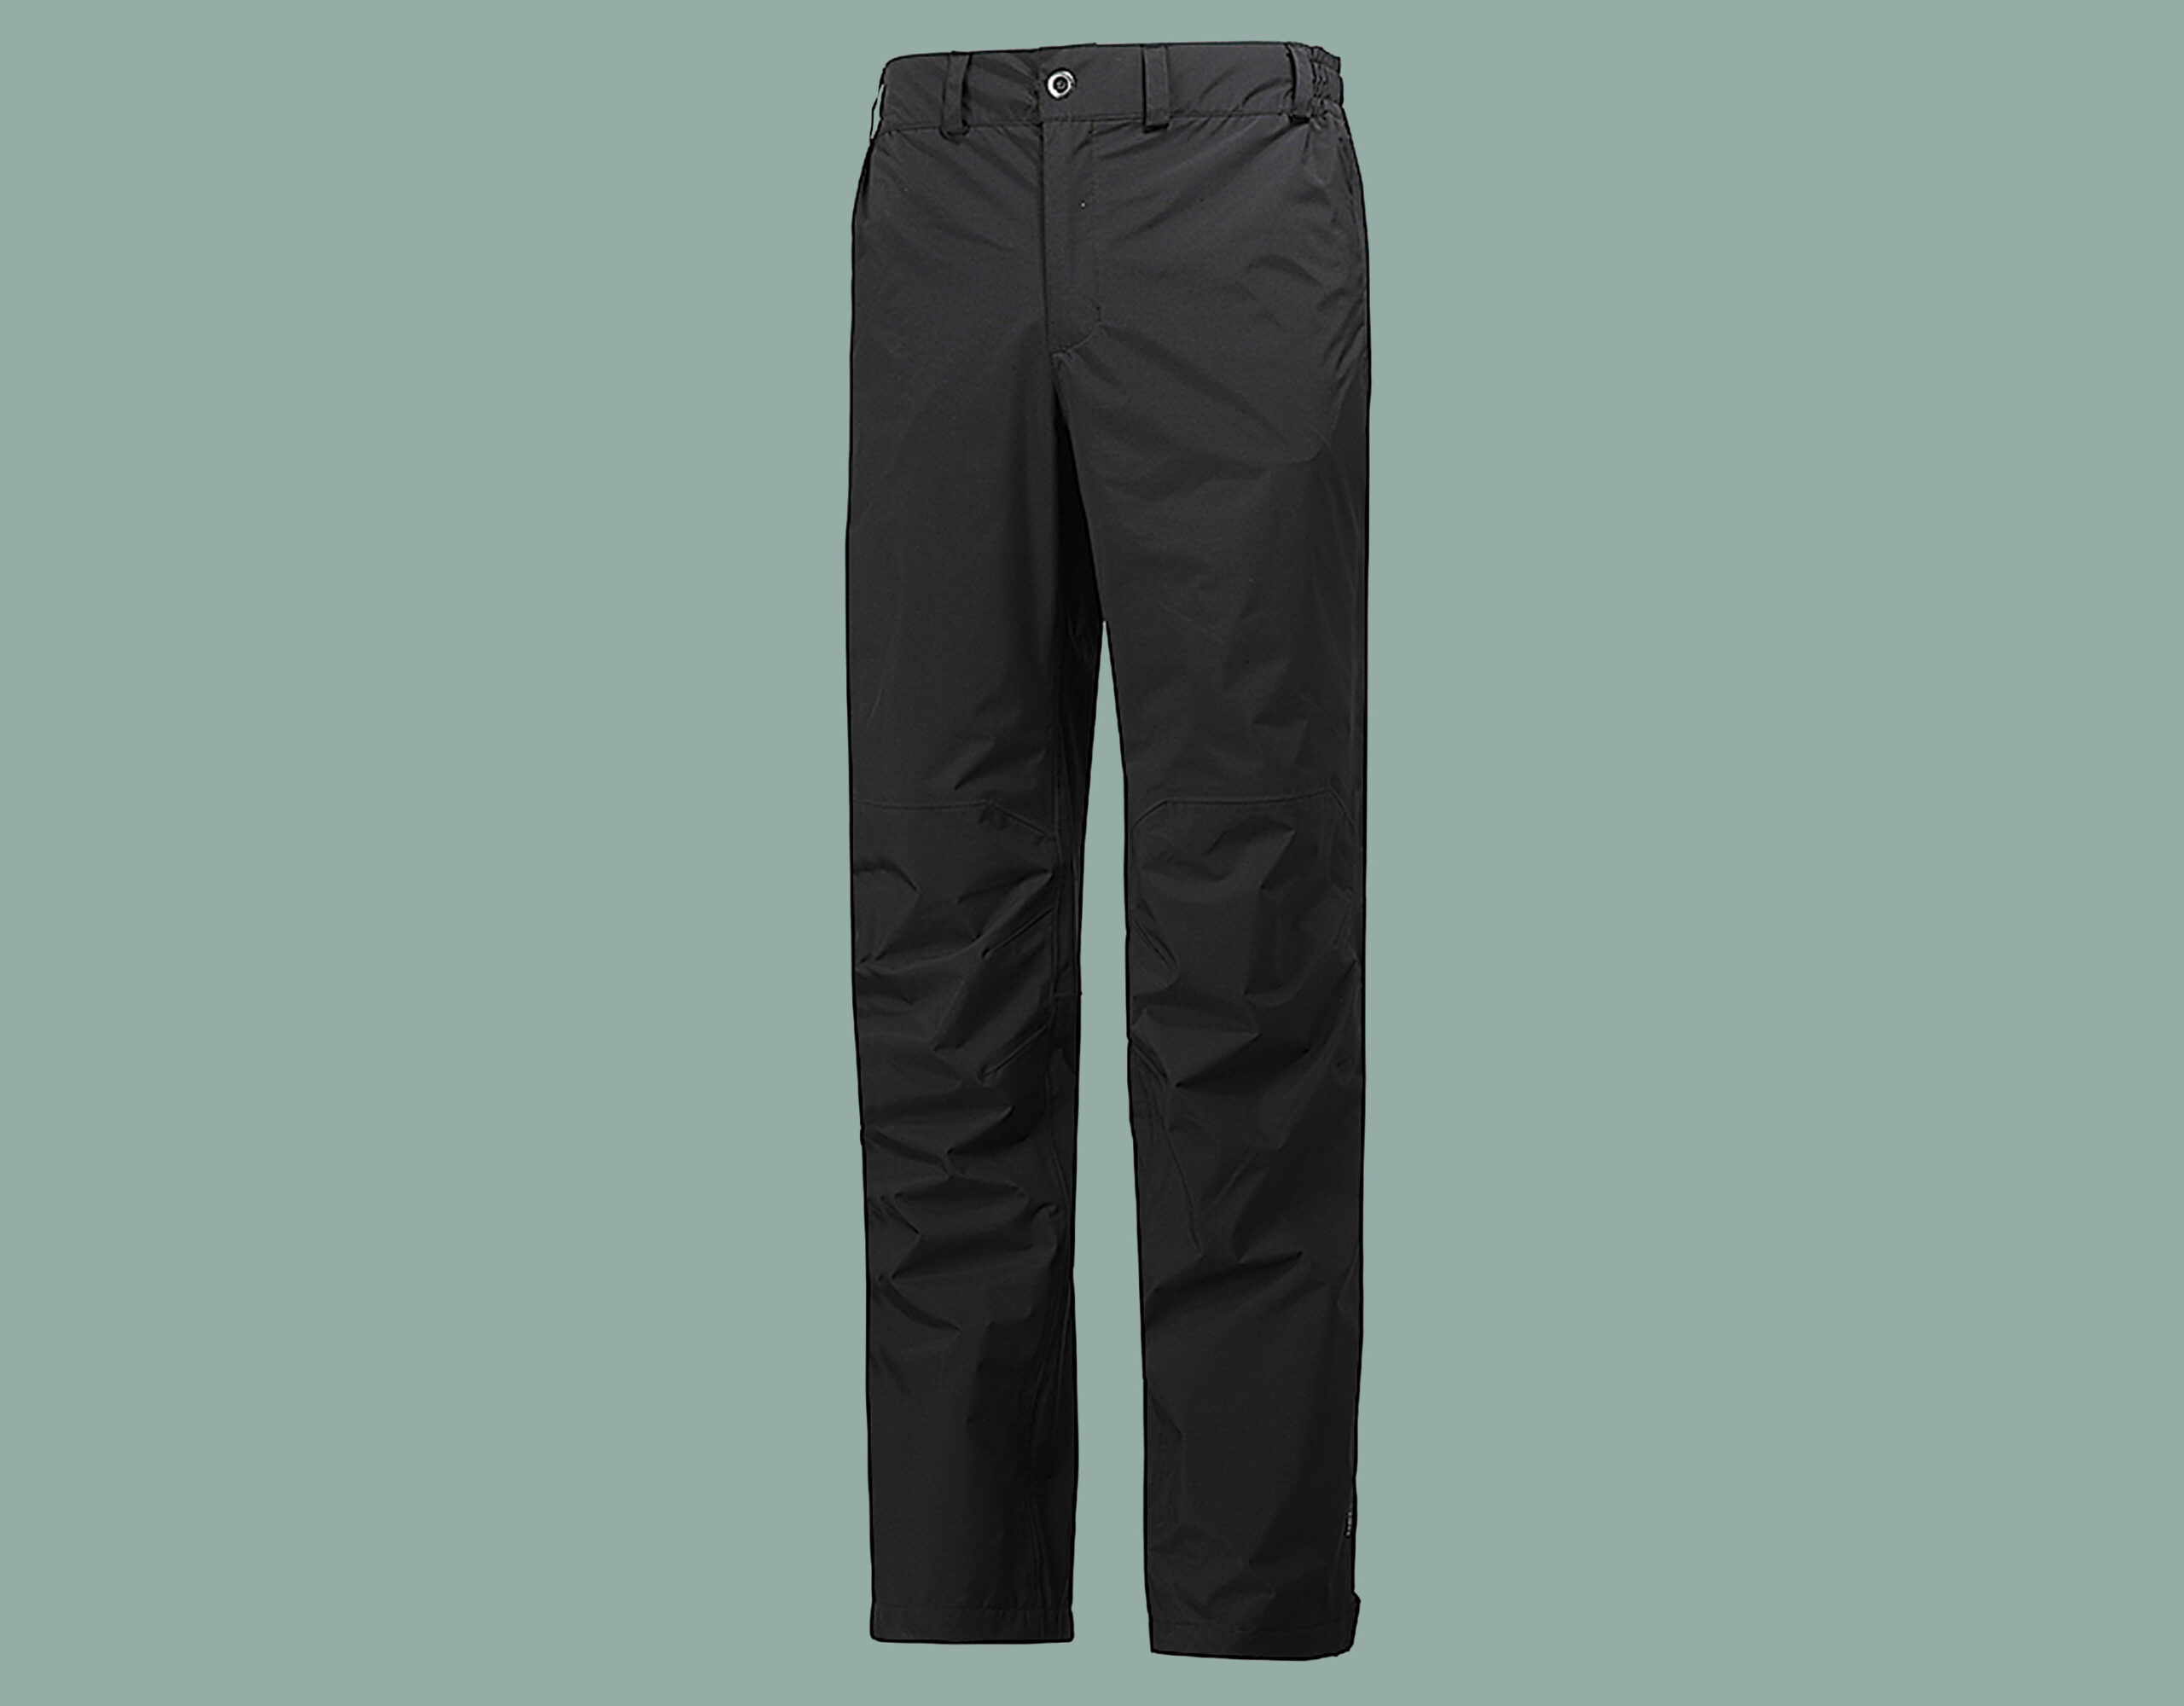 Review: Helly Hansen Packable Pant Waterproof Trousers | TGO Magazine